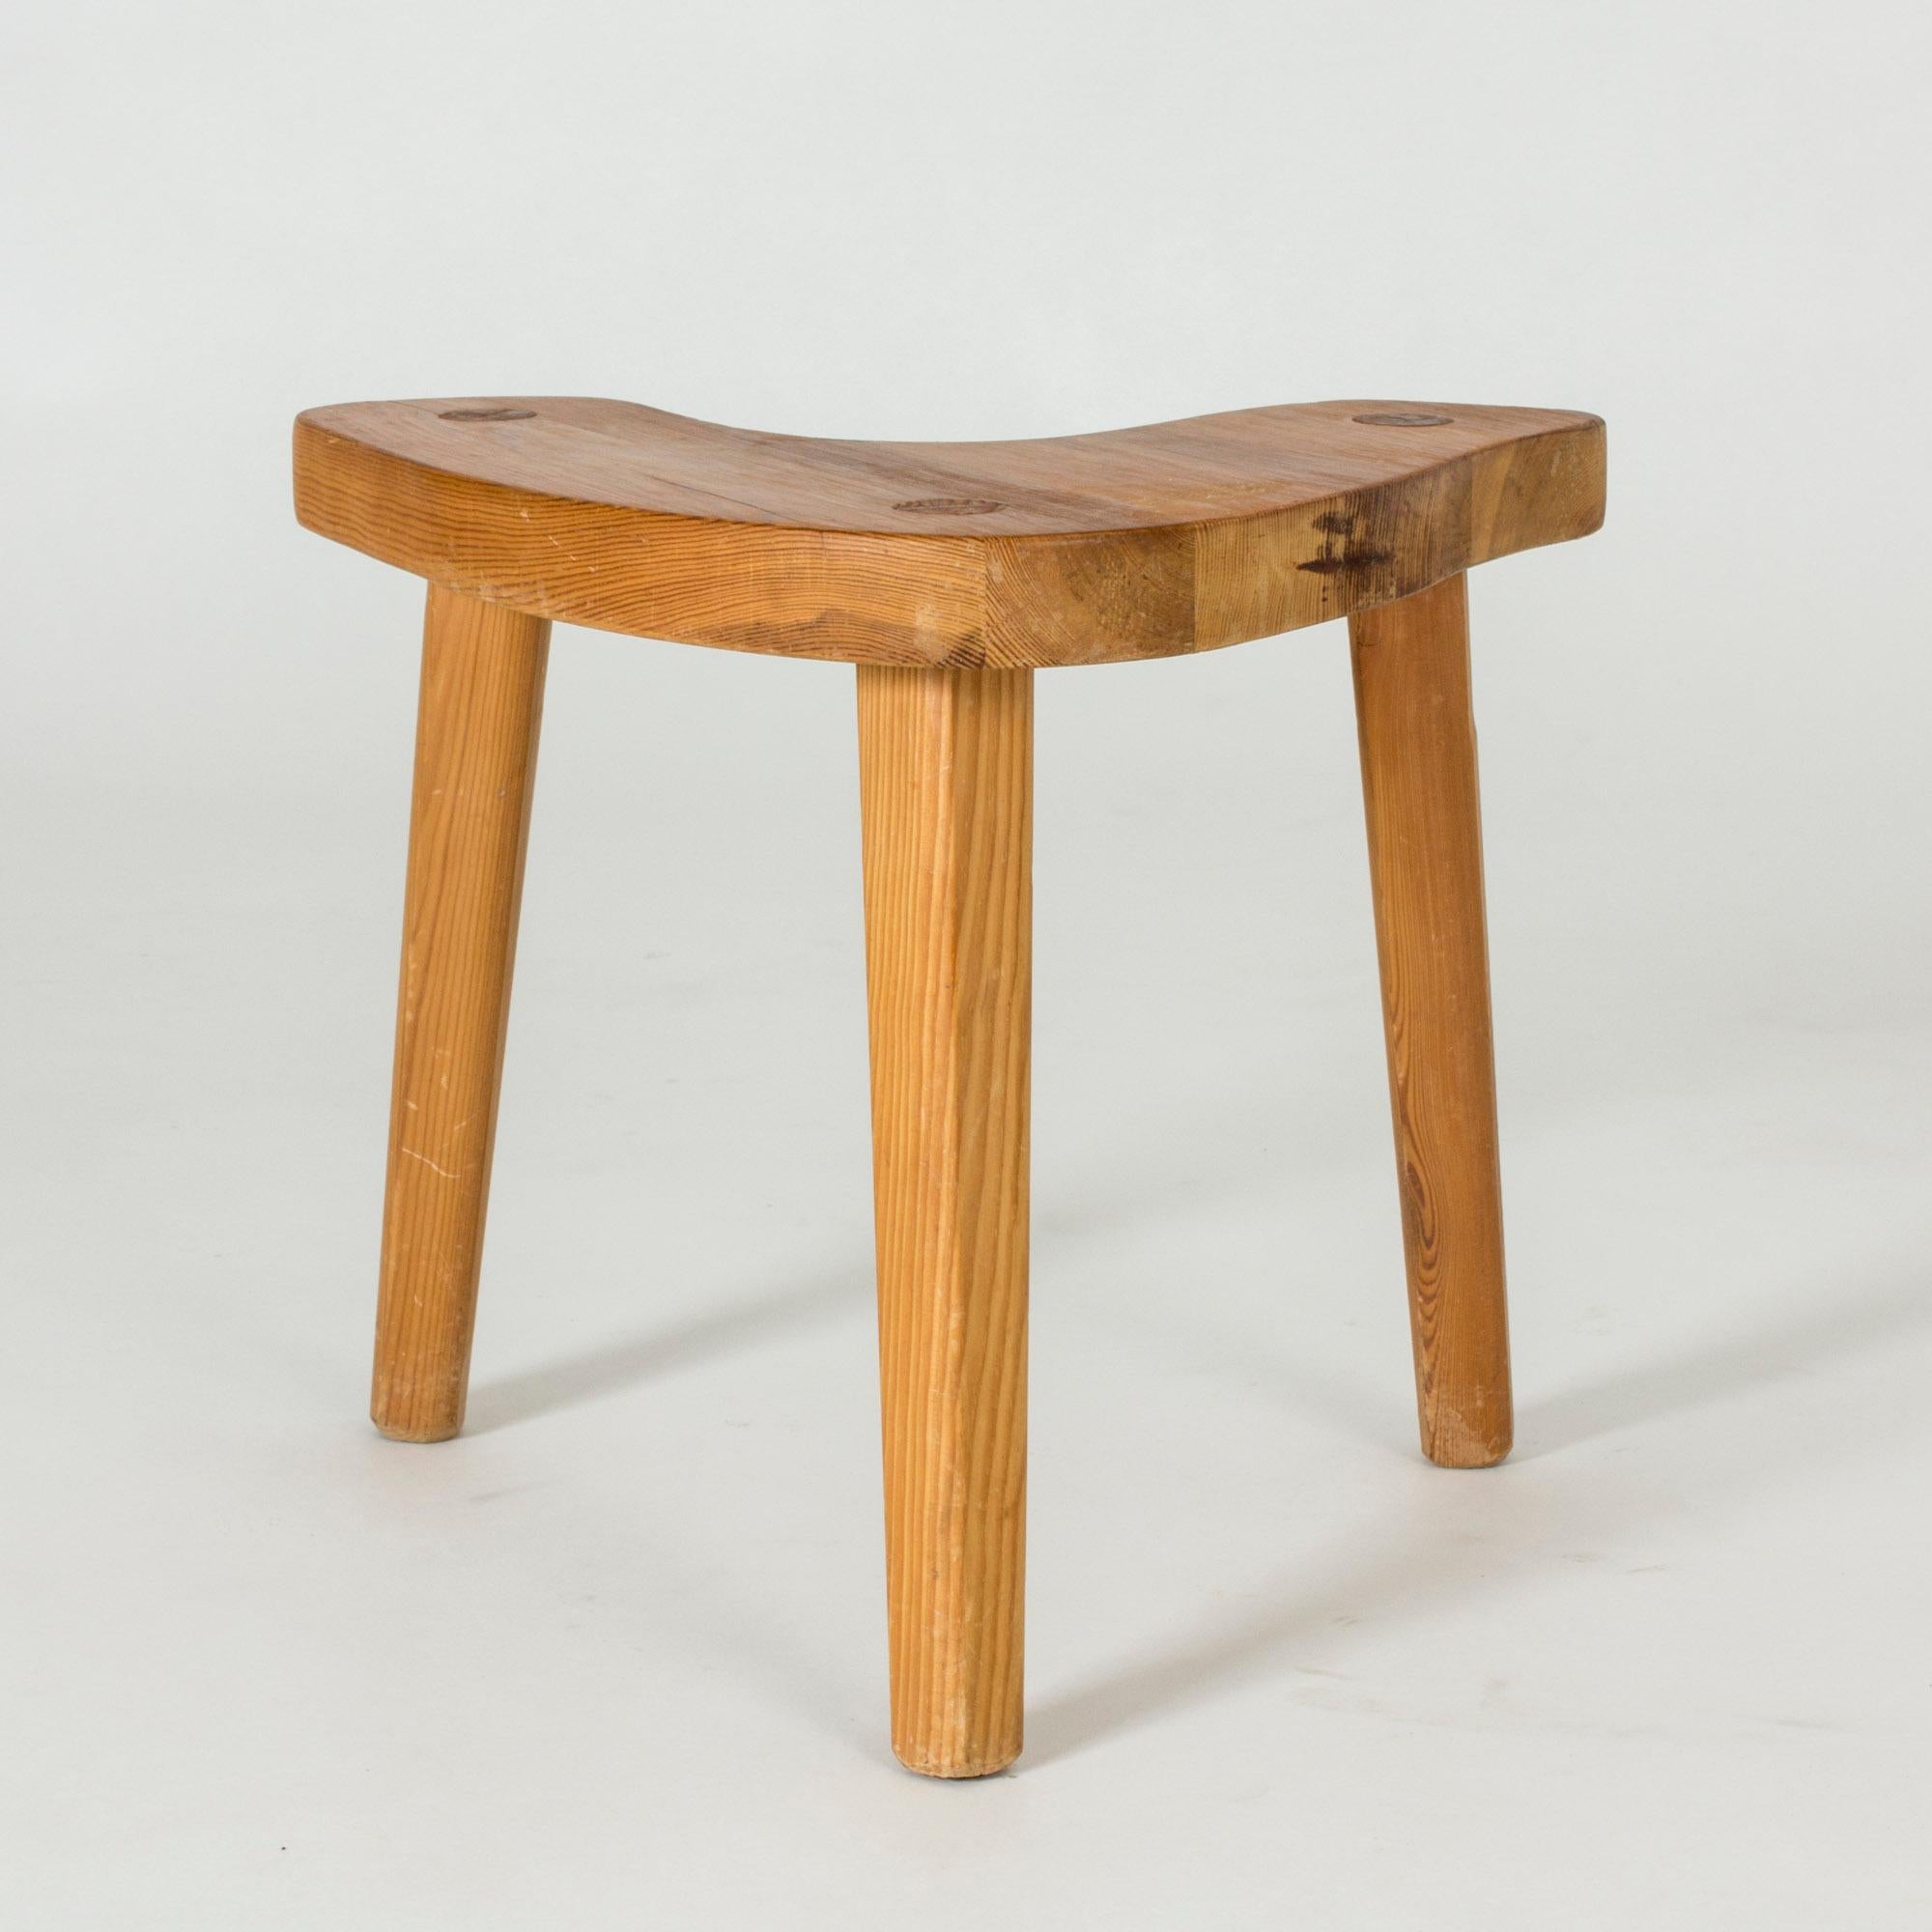 Cool midcentury stool, made from pine. Rustic U-shaped design with accentuated joinery.